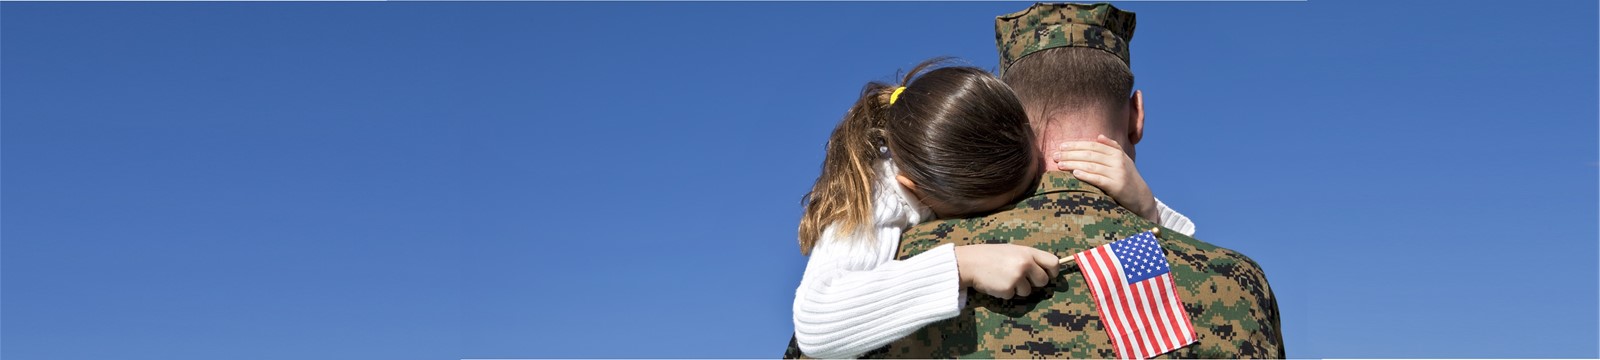 image of Marine greeting and hugging his young pony-tailed daughter who is holding an American flag after latest deployment